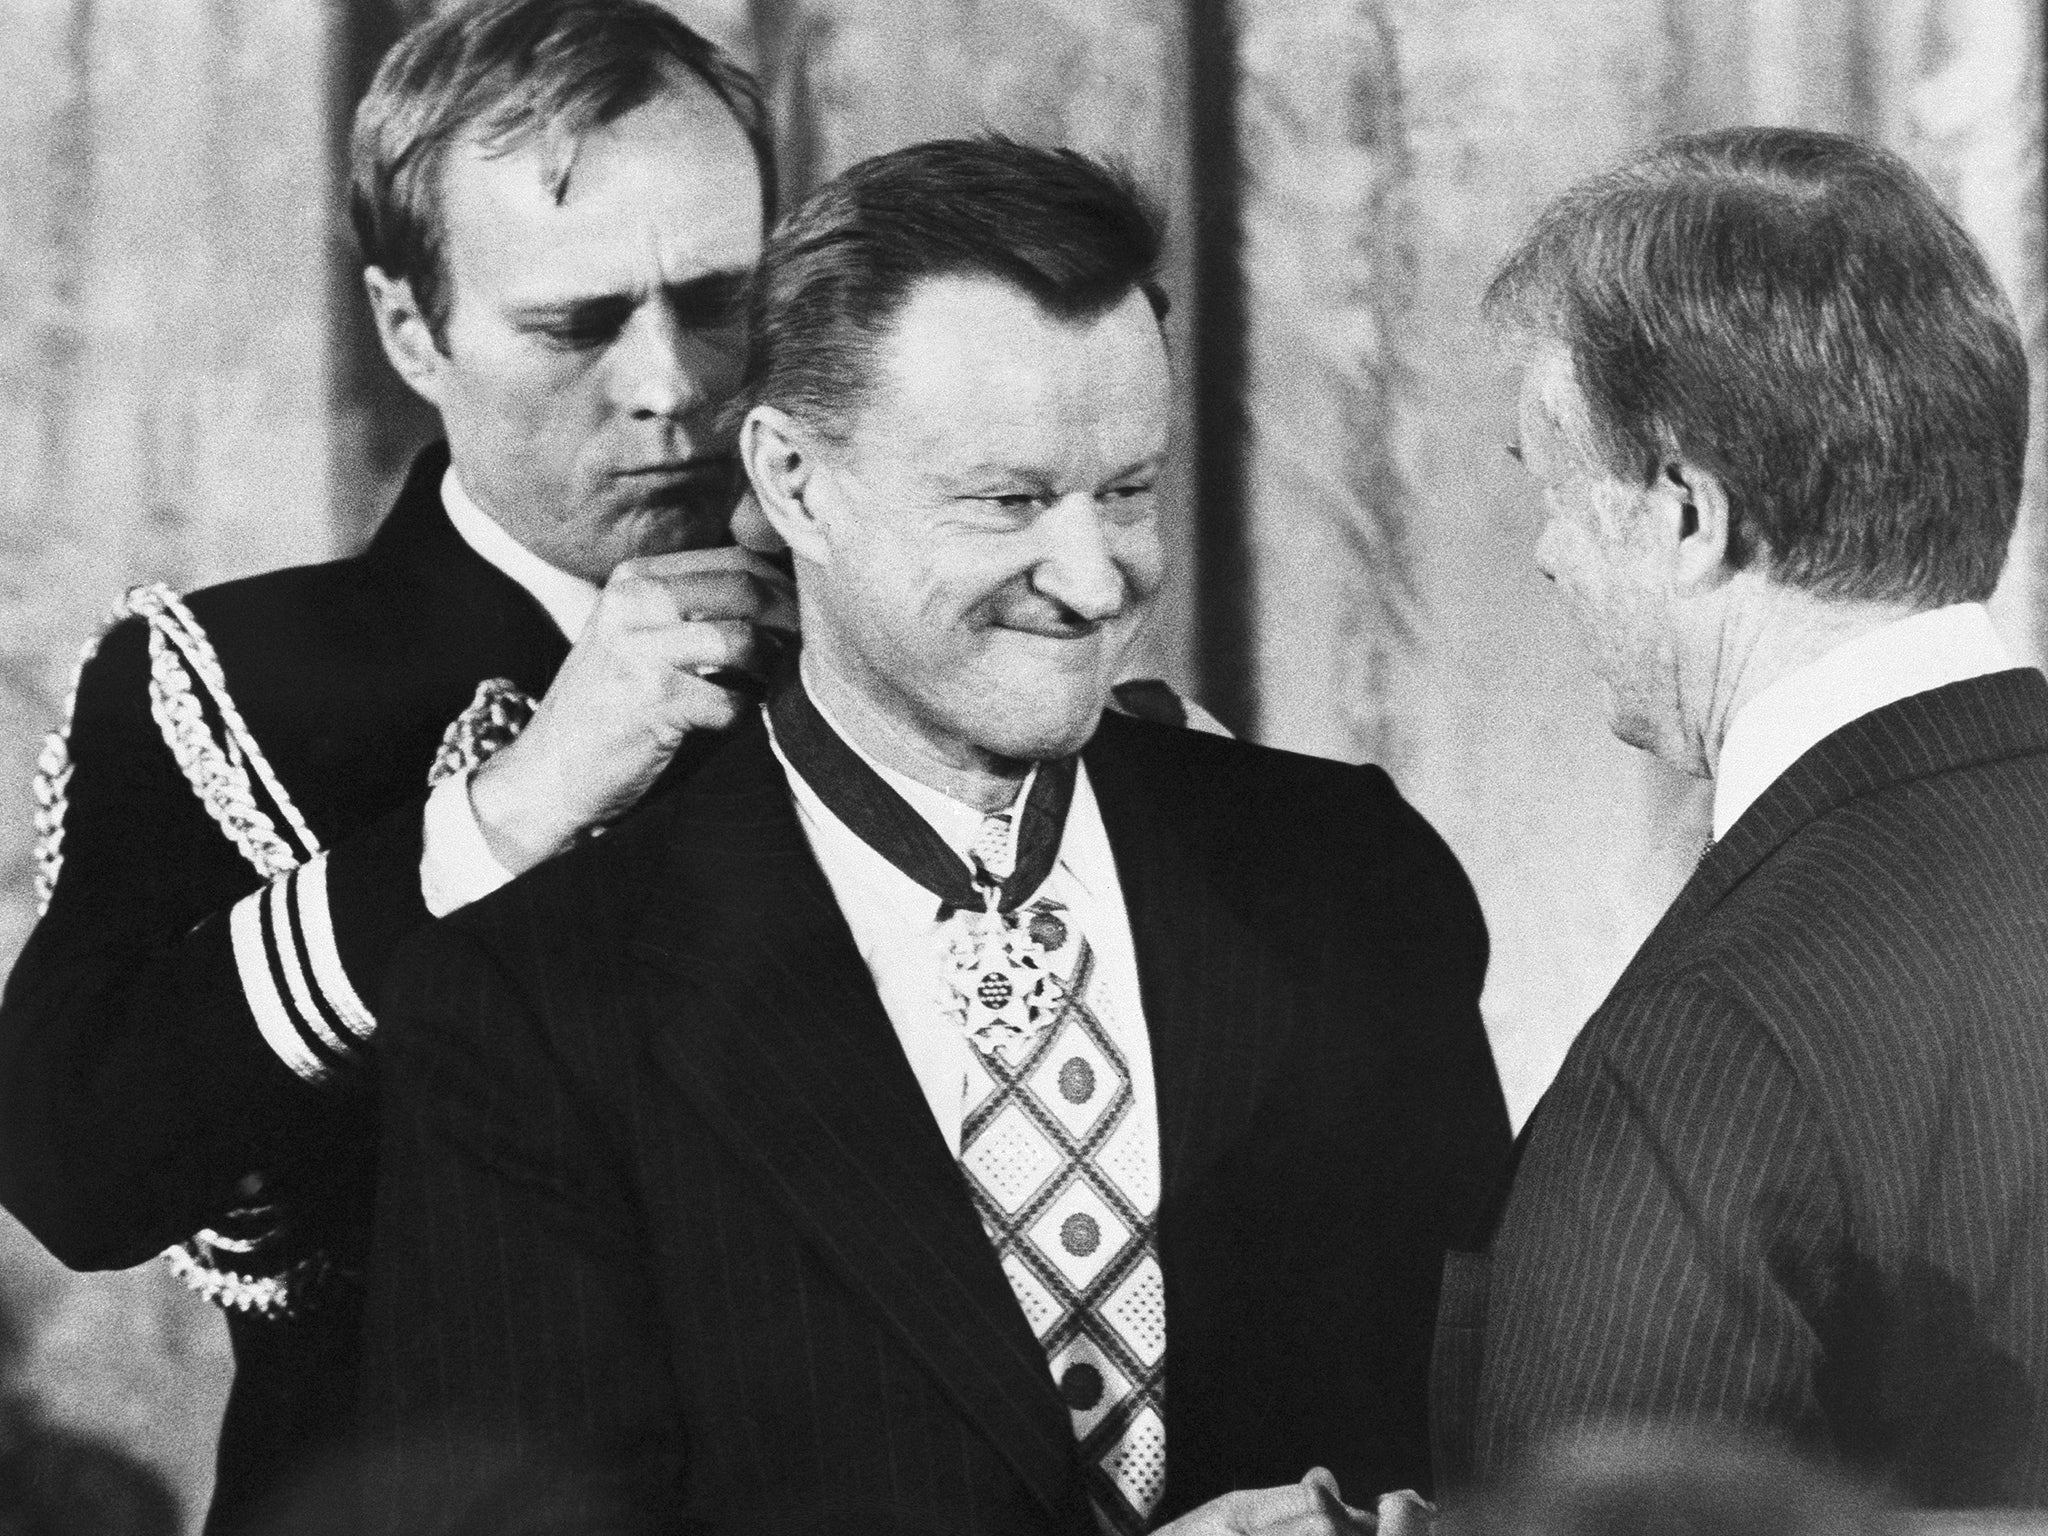 President Jimmy Carter presents Zbigniew Brzezinski with the Medal of Freedom at a White House ceremony in Washington in January 1981